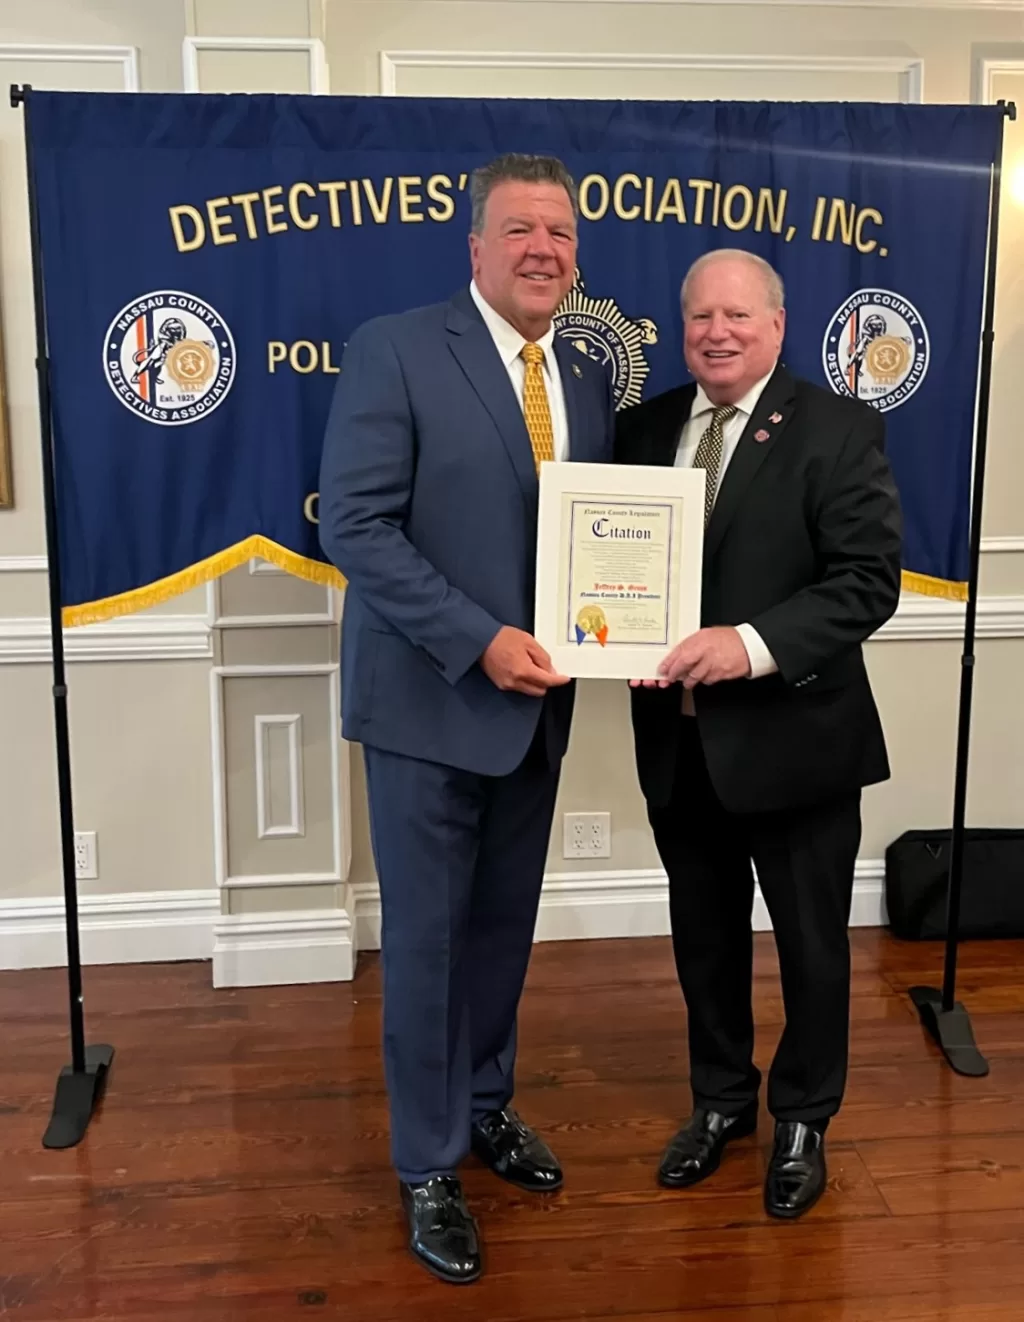 (Photo: Office of Legislator Arnold W. Drucker) Nassau County Legislator Arnold W. Drucker (left) presents the Nassau County Legislature Citation to Jeff Gross (right), former president of the Nassau County Detectives Association, at a special ceremony at the Milleridge Inn in Jericho on August 17.